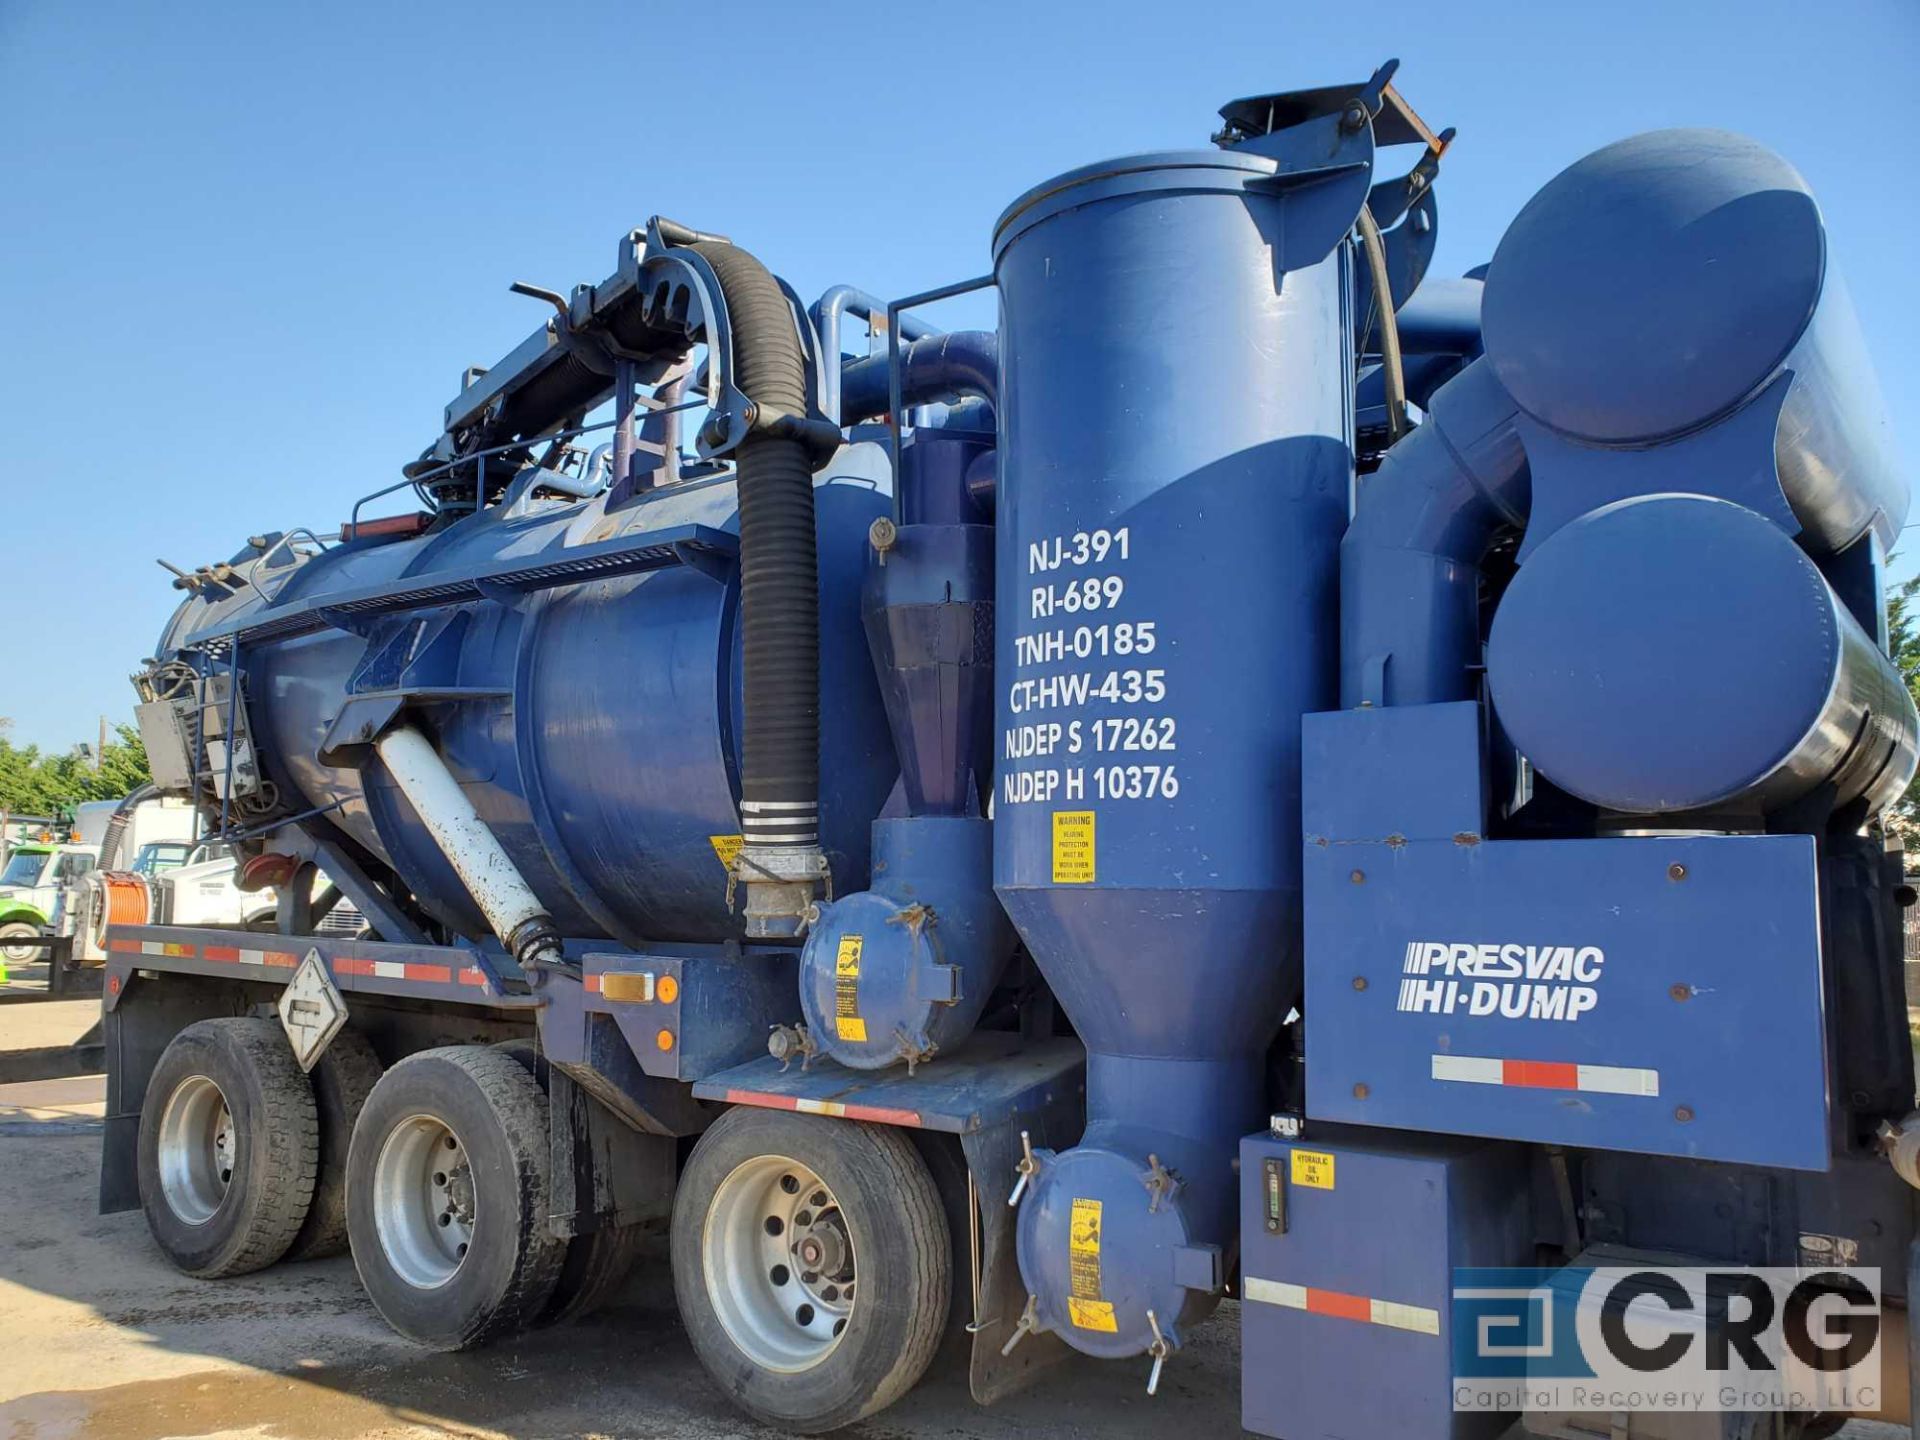 1999 Sterling L951 tag axle Turbo Vac Truck, 73,000 GVWR, with 3,000 gal. capacity Presvac carbon - Image 3 of 13